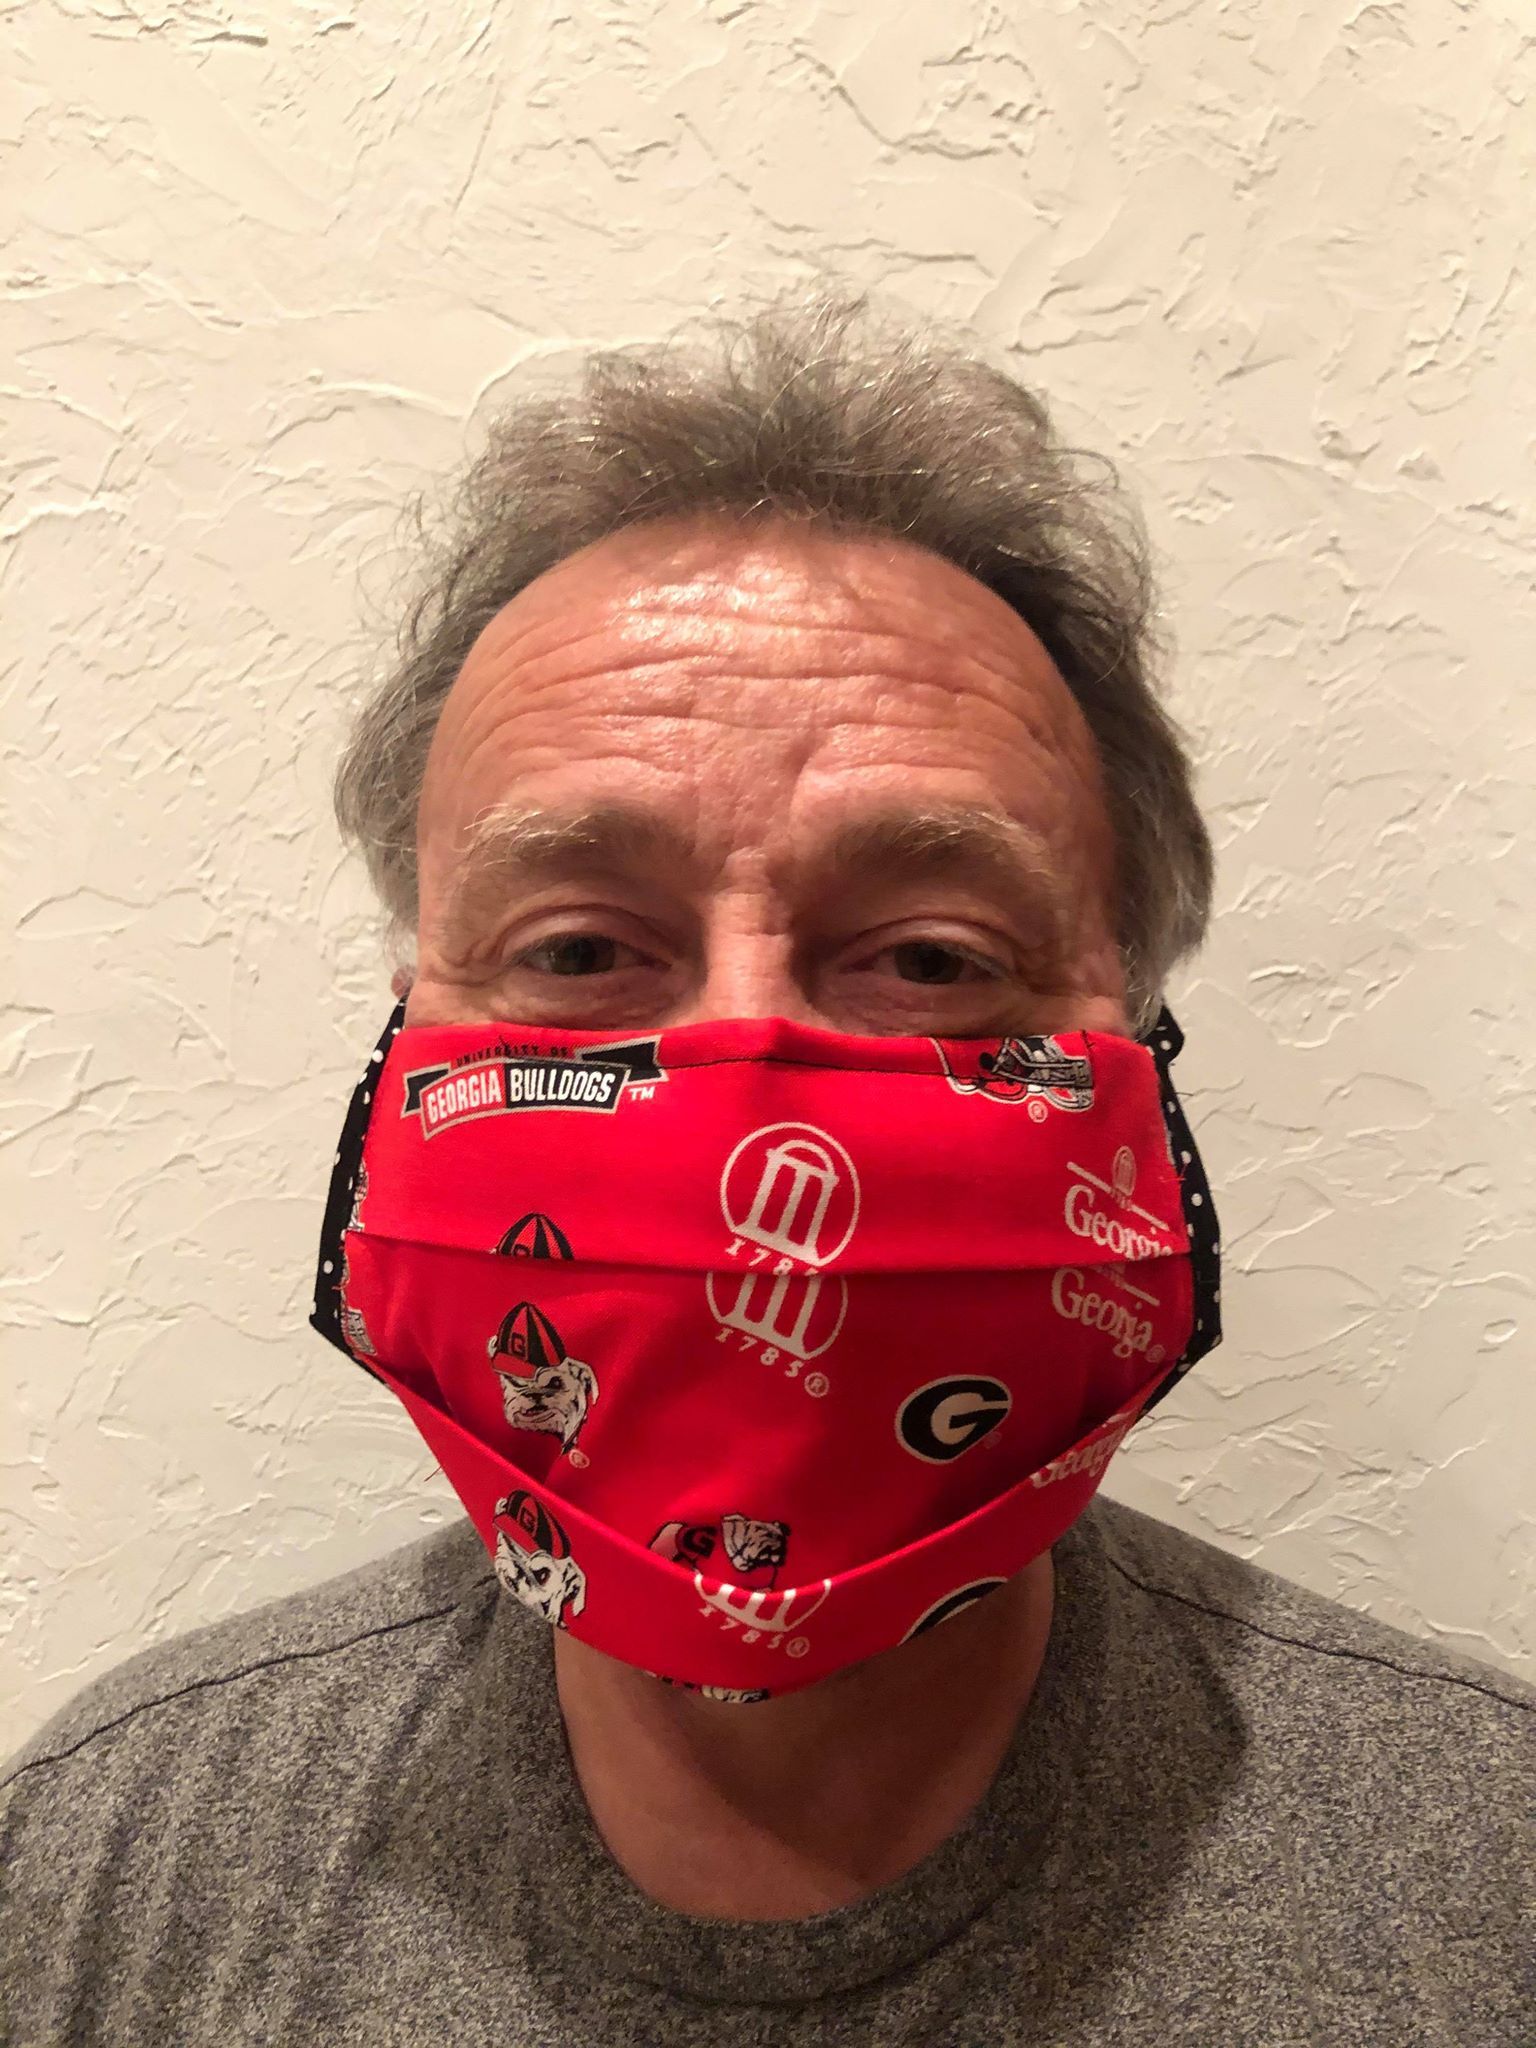 Guy with a mask to prevent the spread of COVID-19